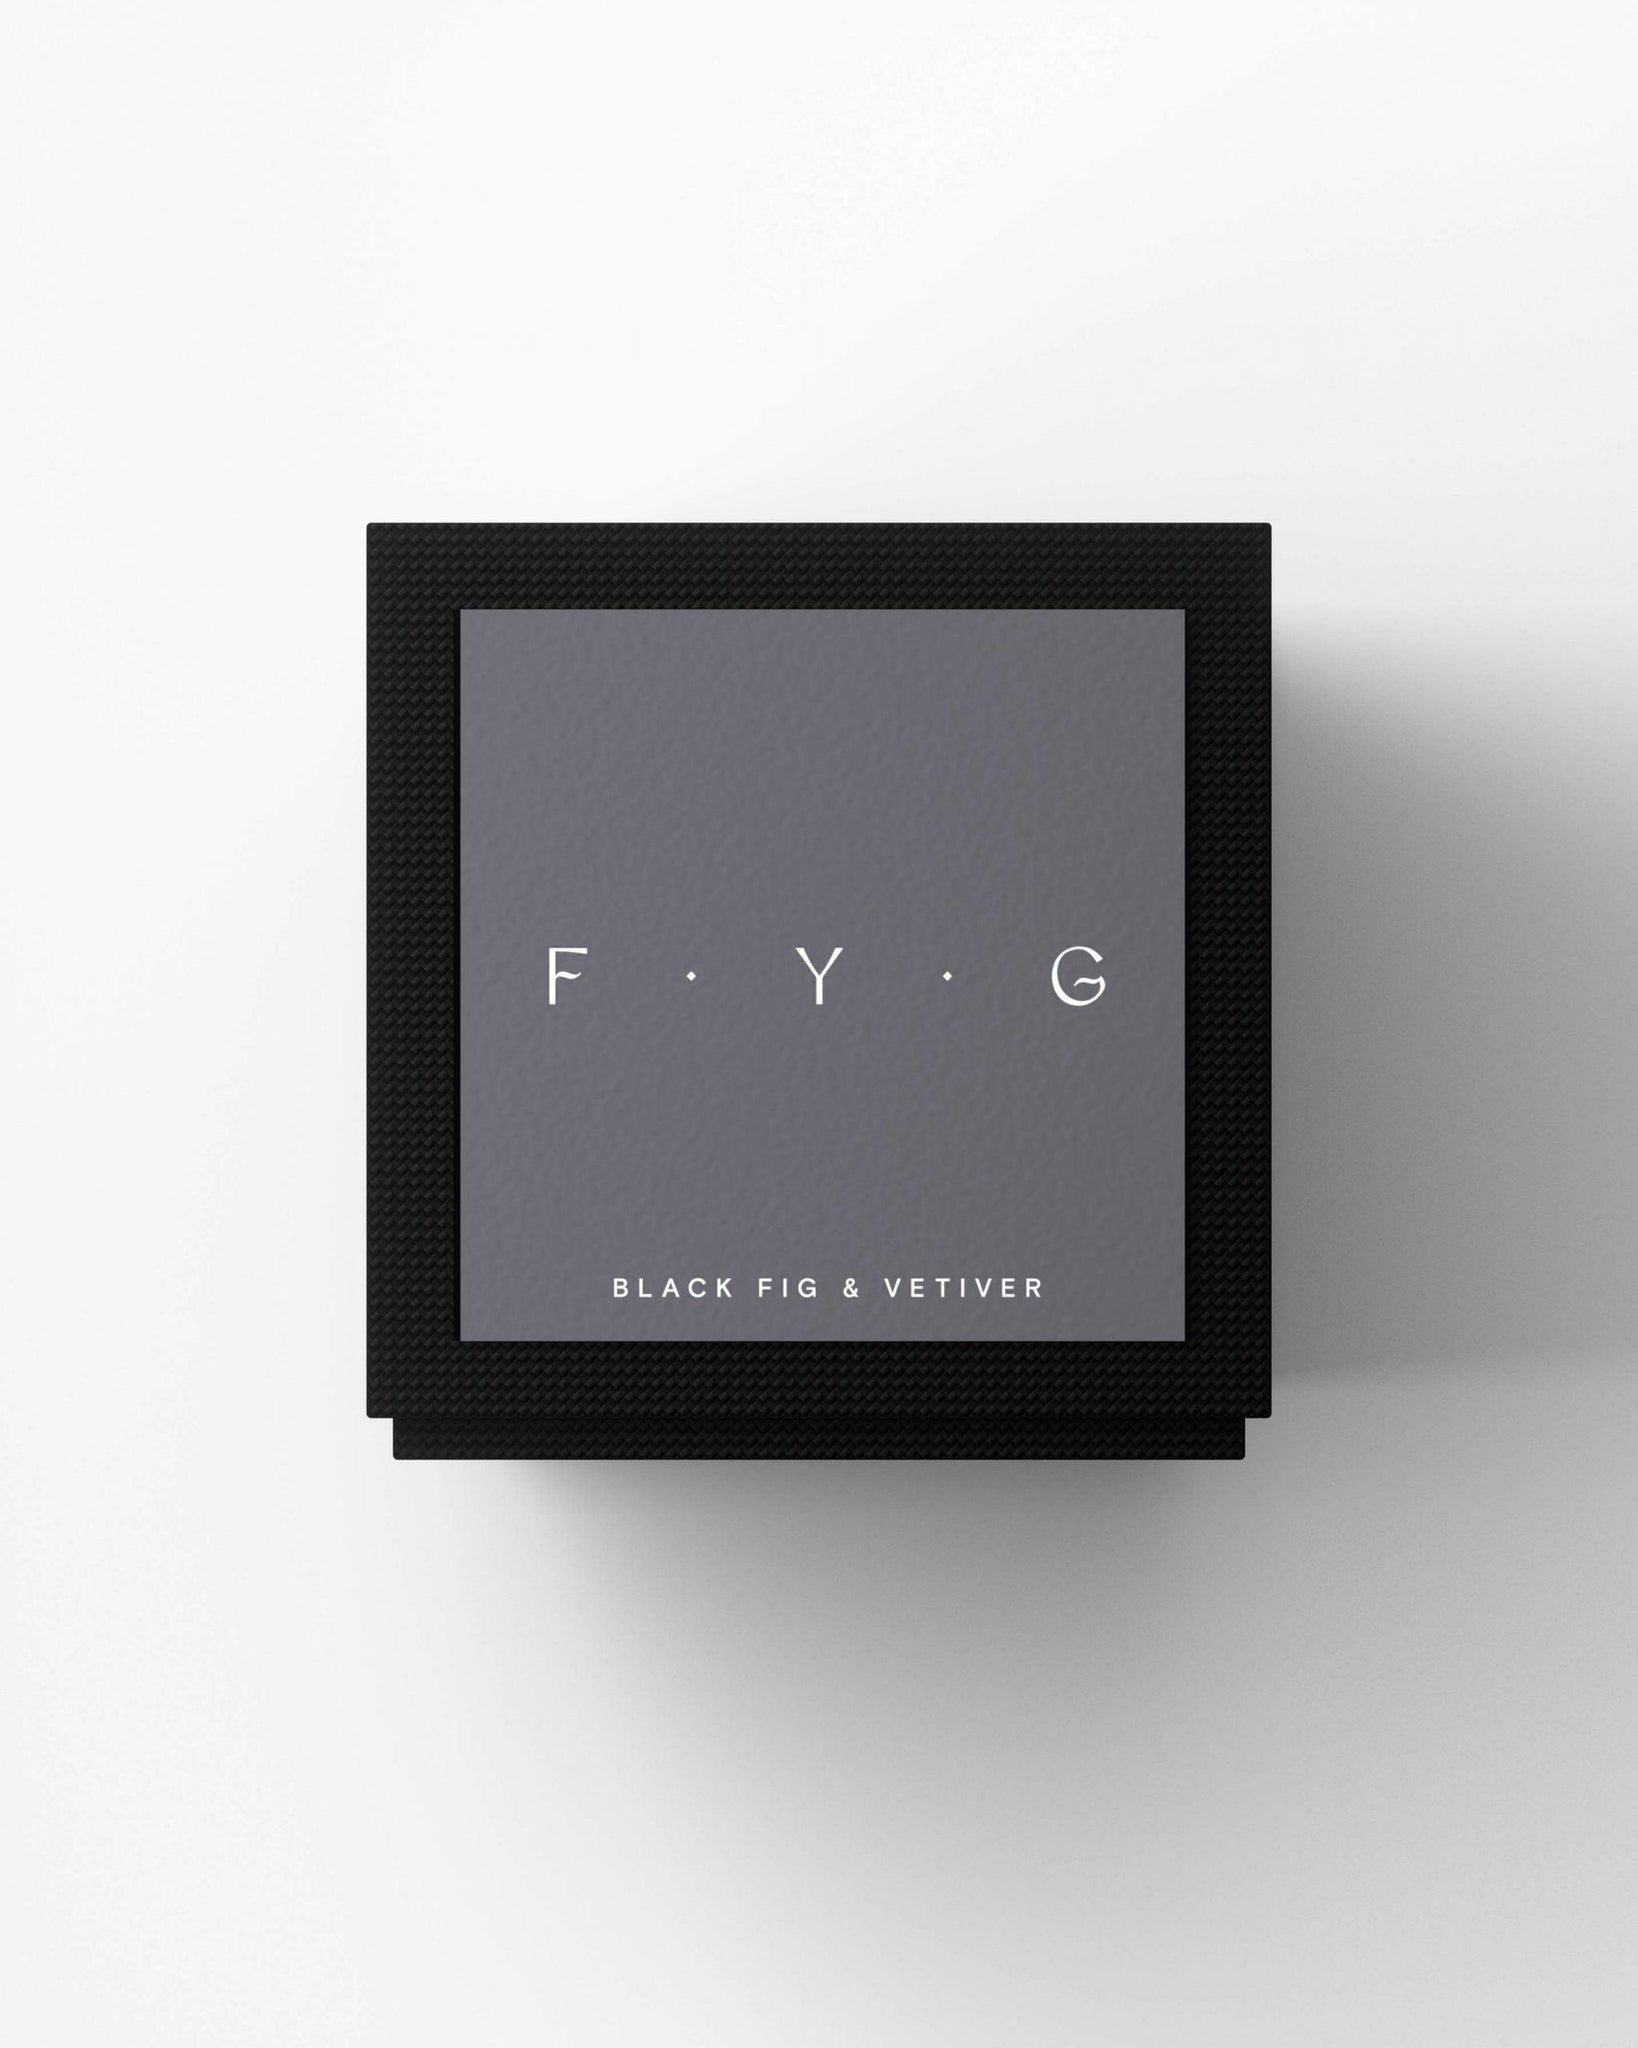 F.Y.G Candle Black Fig & Vetiver - MADE THE EDIT